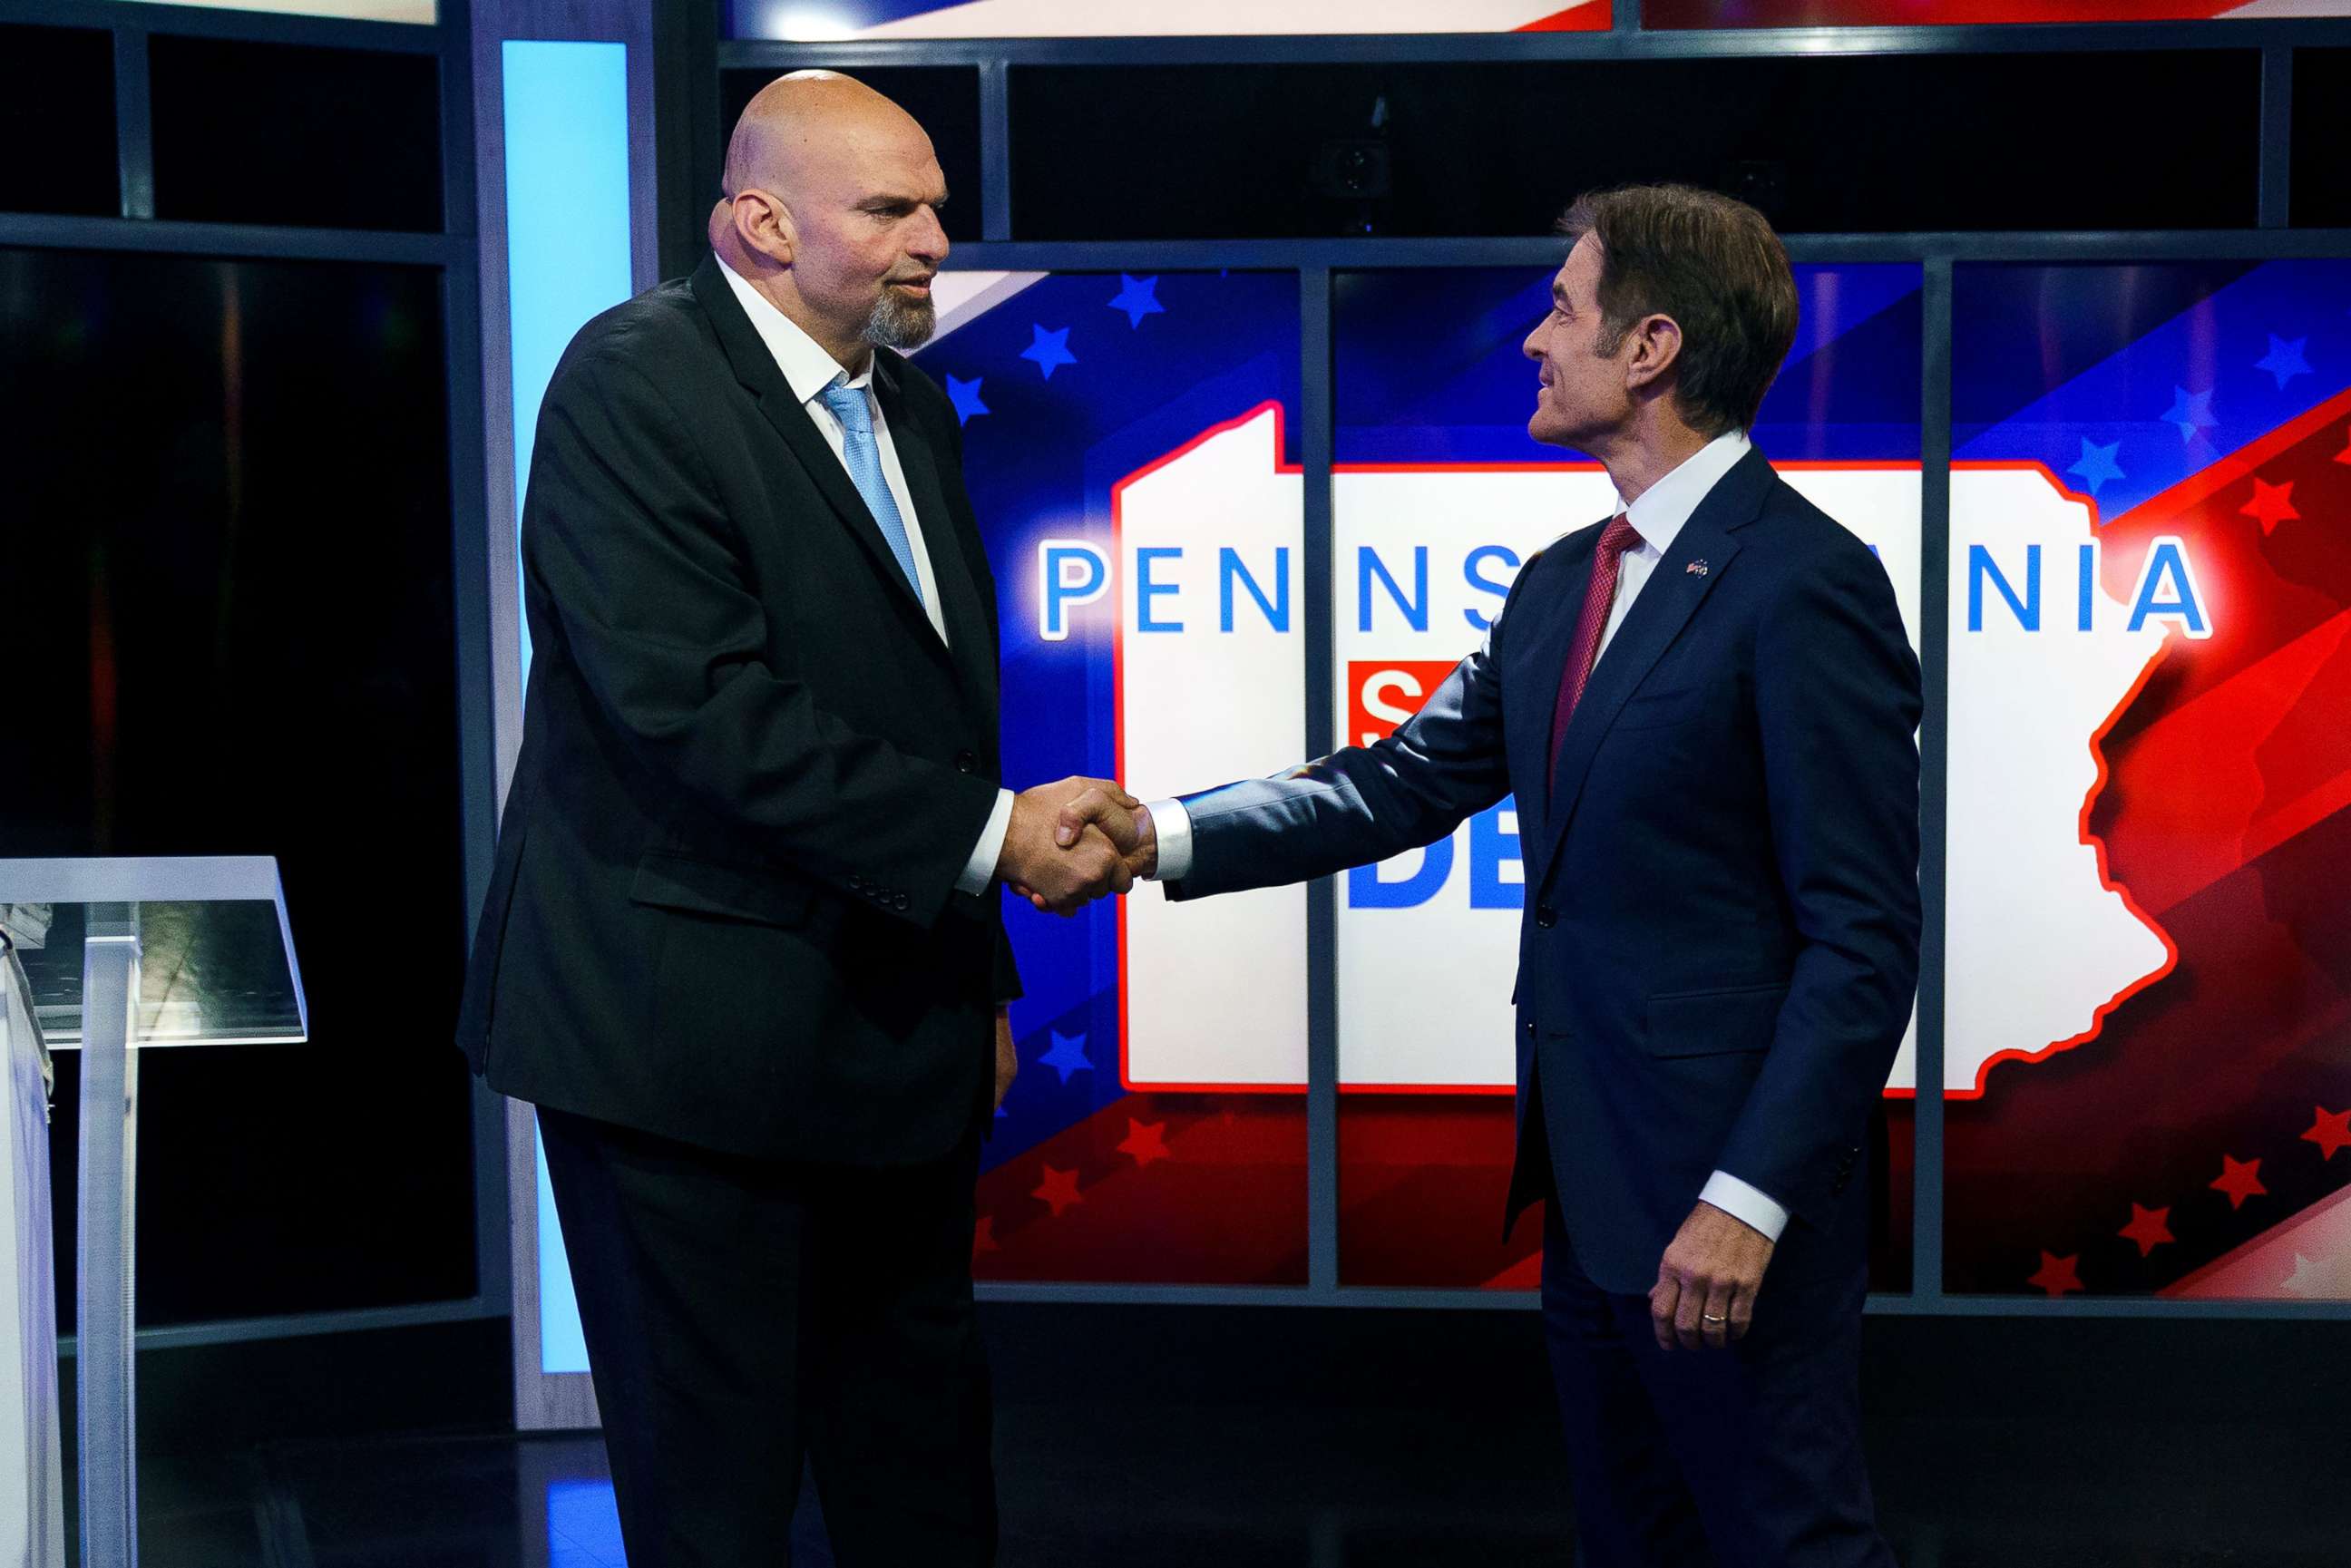 PHOTO: A handout photo made available by abc27 shows Democratic candidate Lt. Gov. John Fetterman (L) and Republican Pennsylvania Senate candidate Dr. Mehmet Oz (R) shaking hands prior to their debate in Harrisburg, Penn., Oct. 25, 2022.